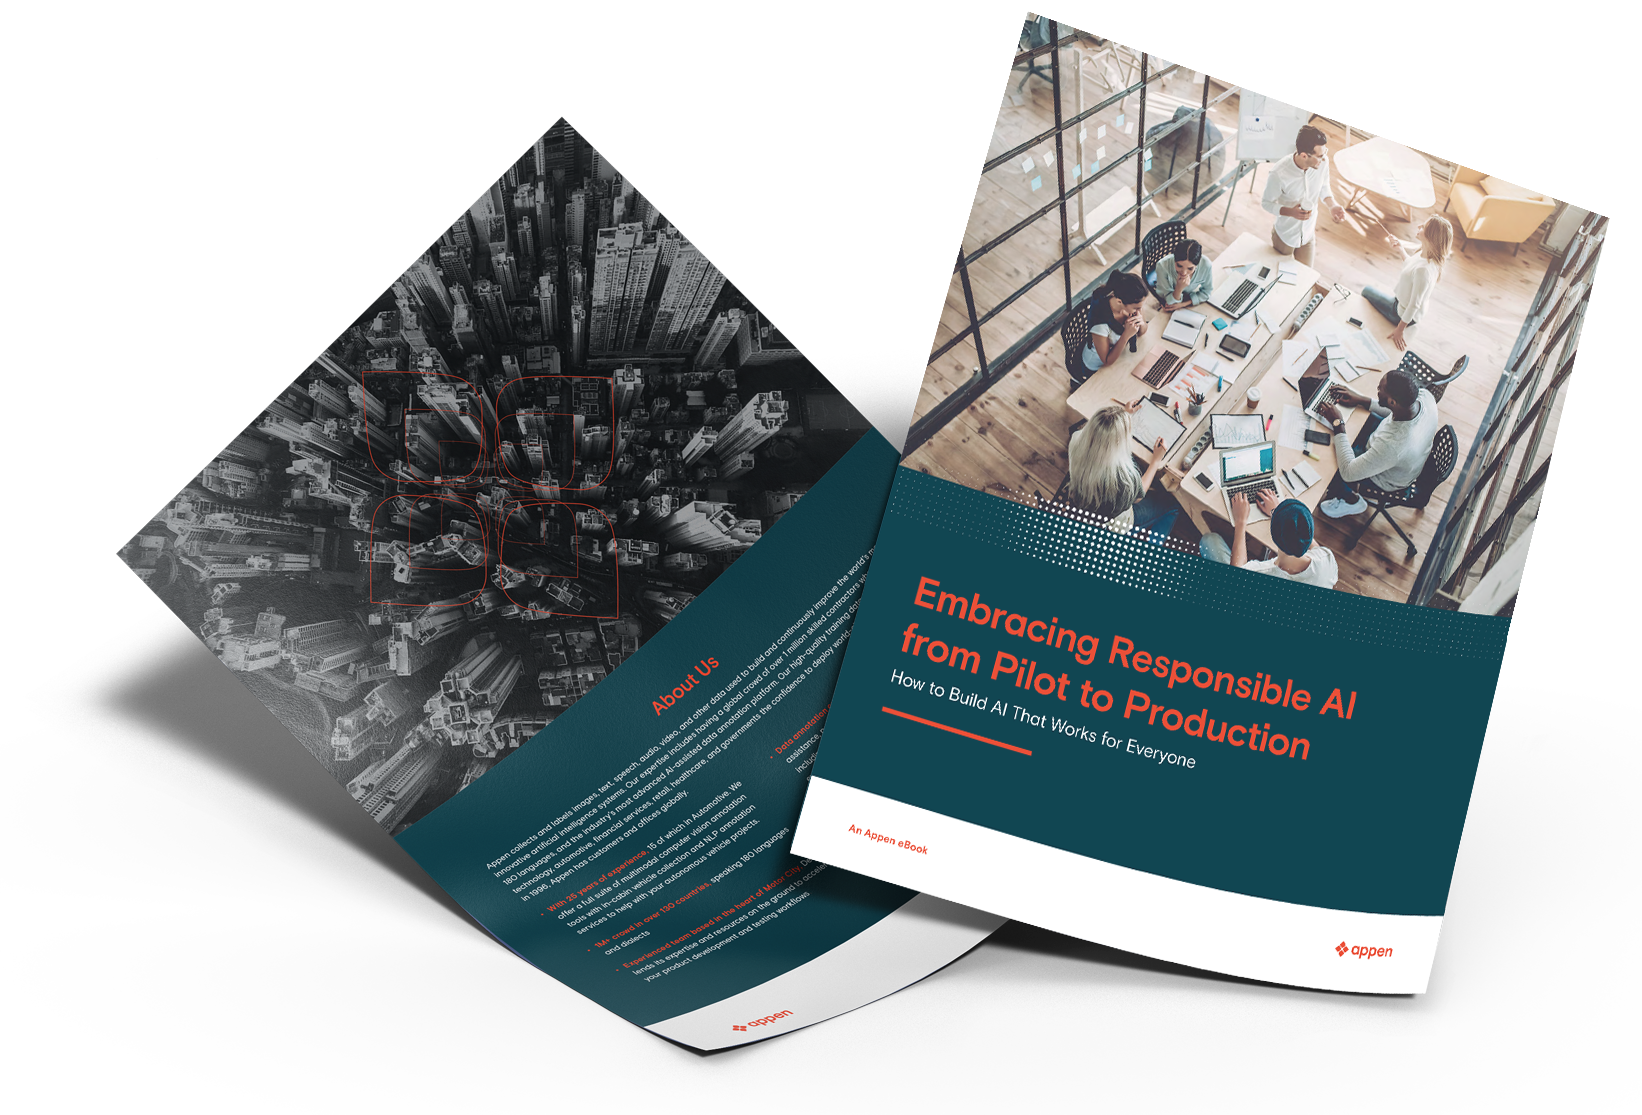 Embracing Responsible AI from Pilot to Production ebook cover